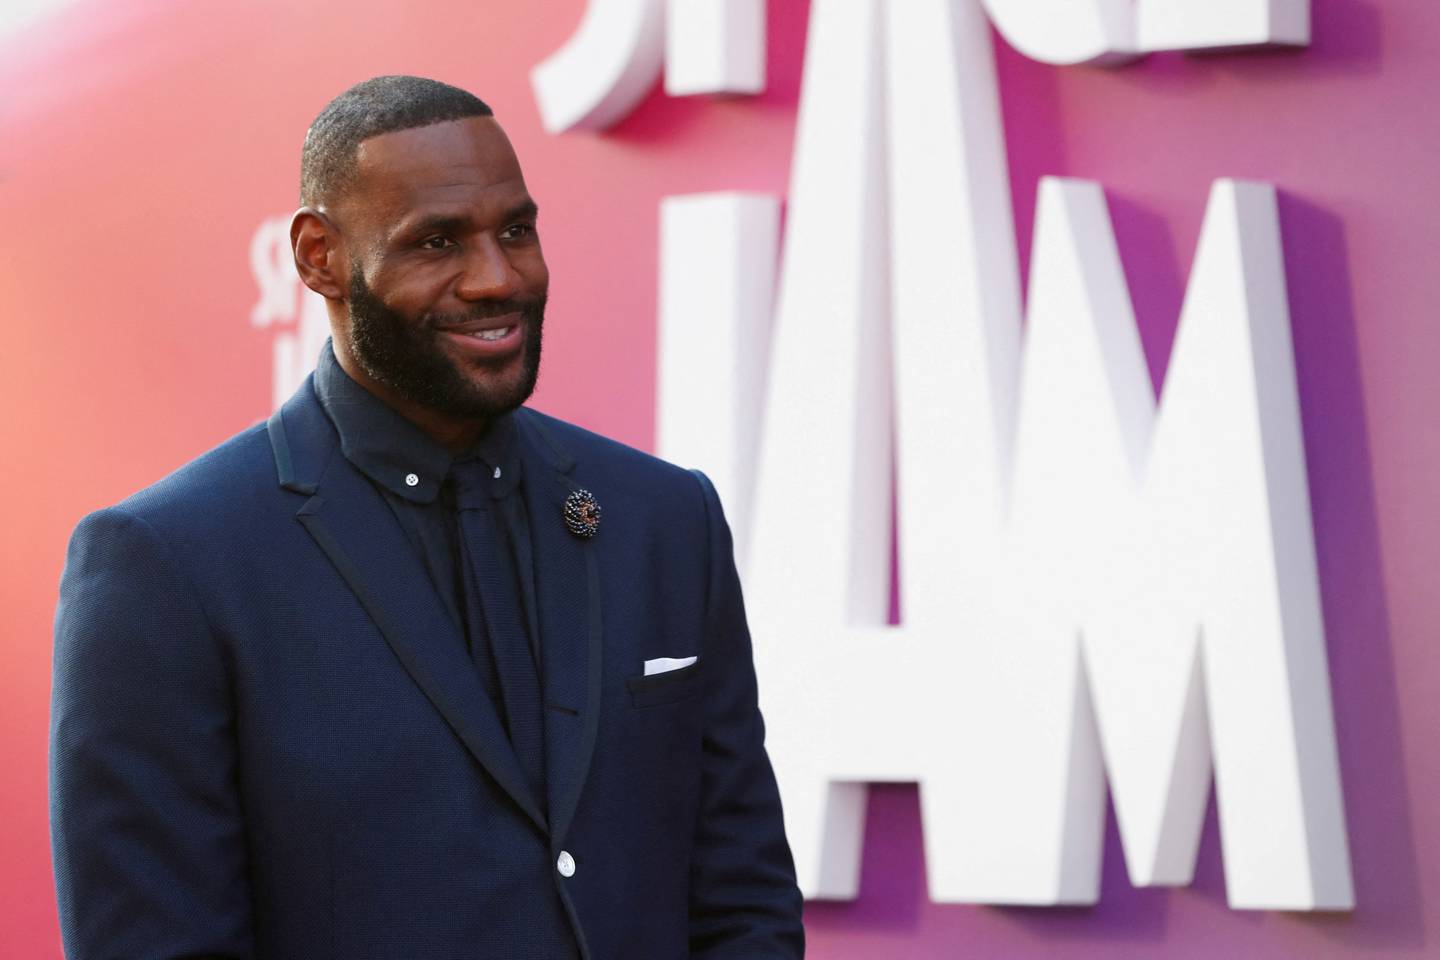 LeBron James became the second NBA player, after Michael Jordan, to play with the Looney Tunes after starring in the 2021 film 'Space Jam: A New Legacy'. Reuters